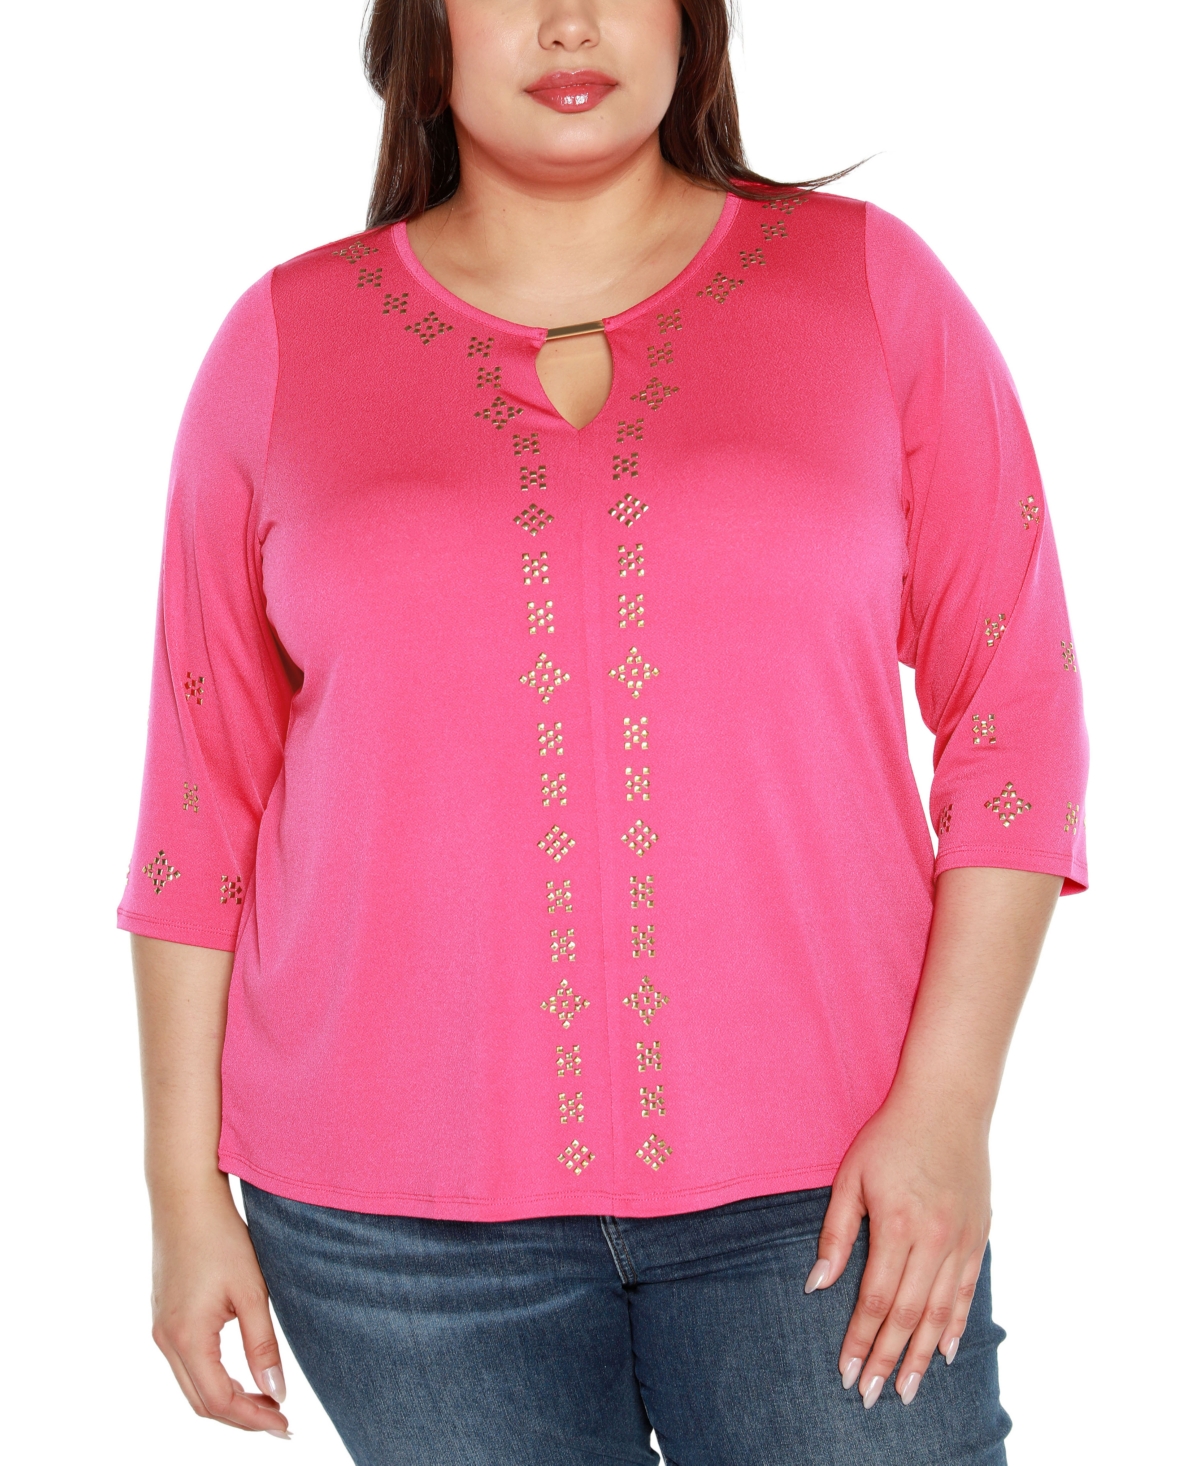 Belldini Black Label Plus Size Embellished Keyhole Knit Top In Pink